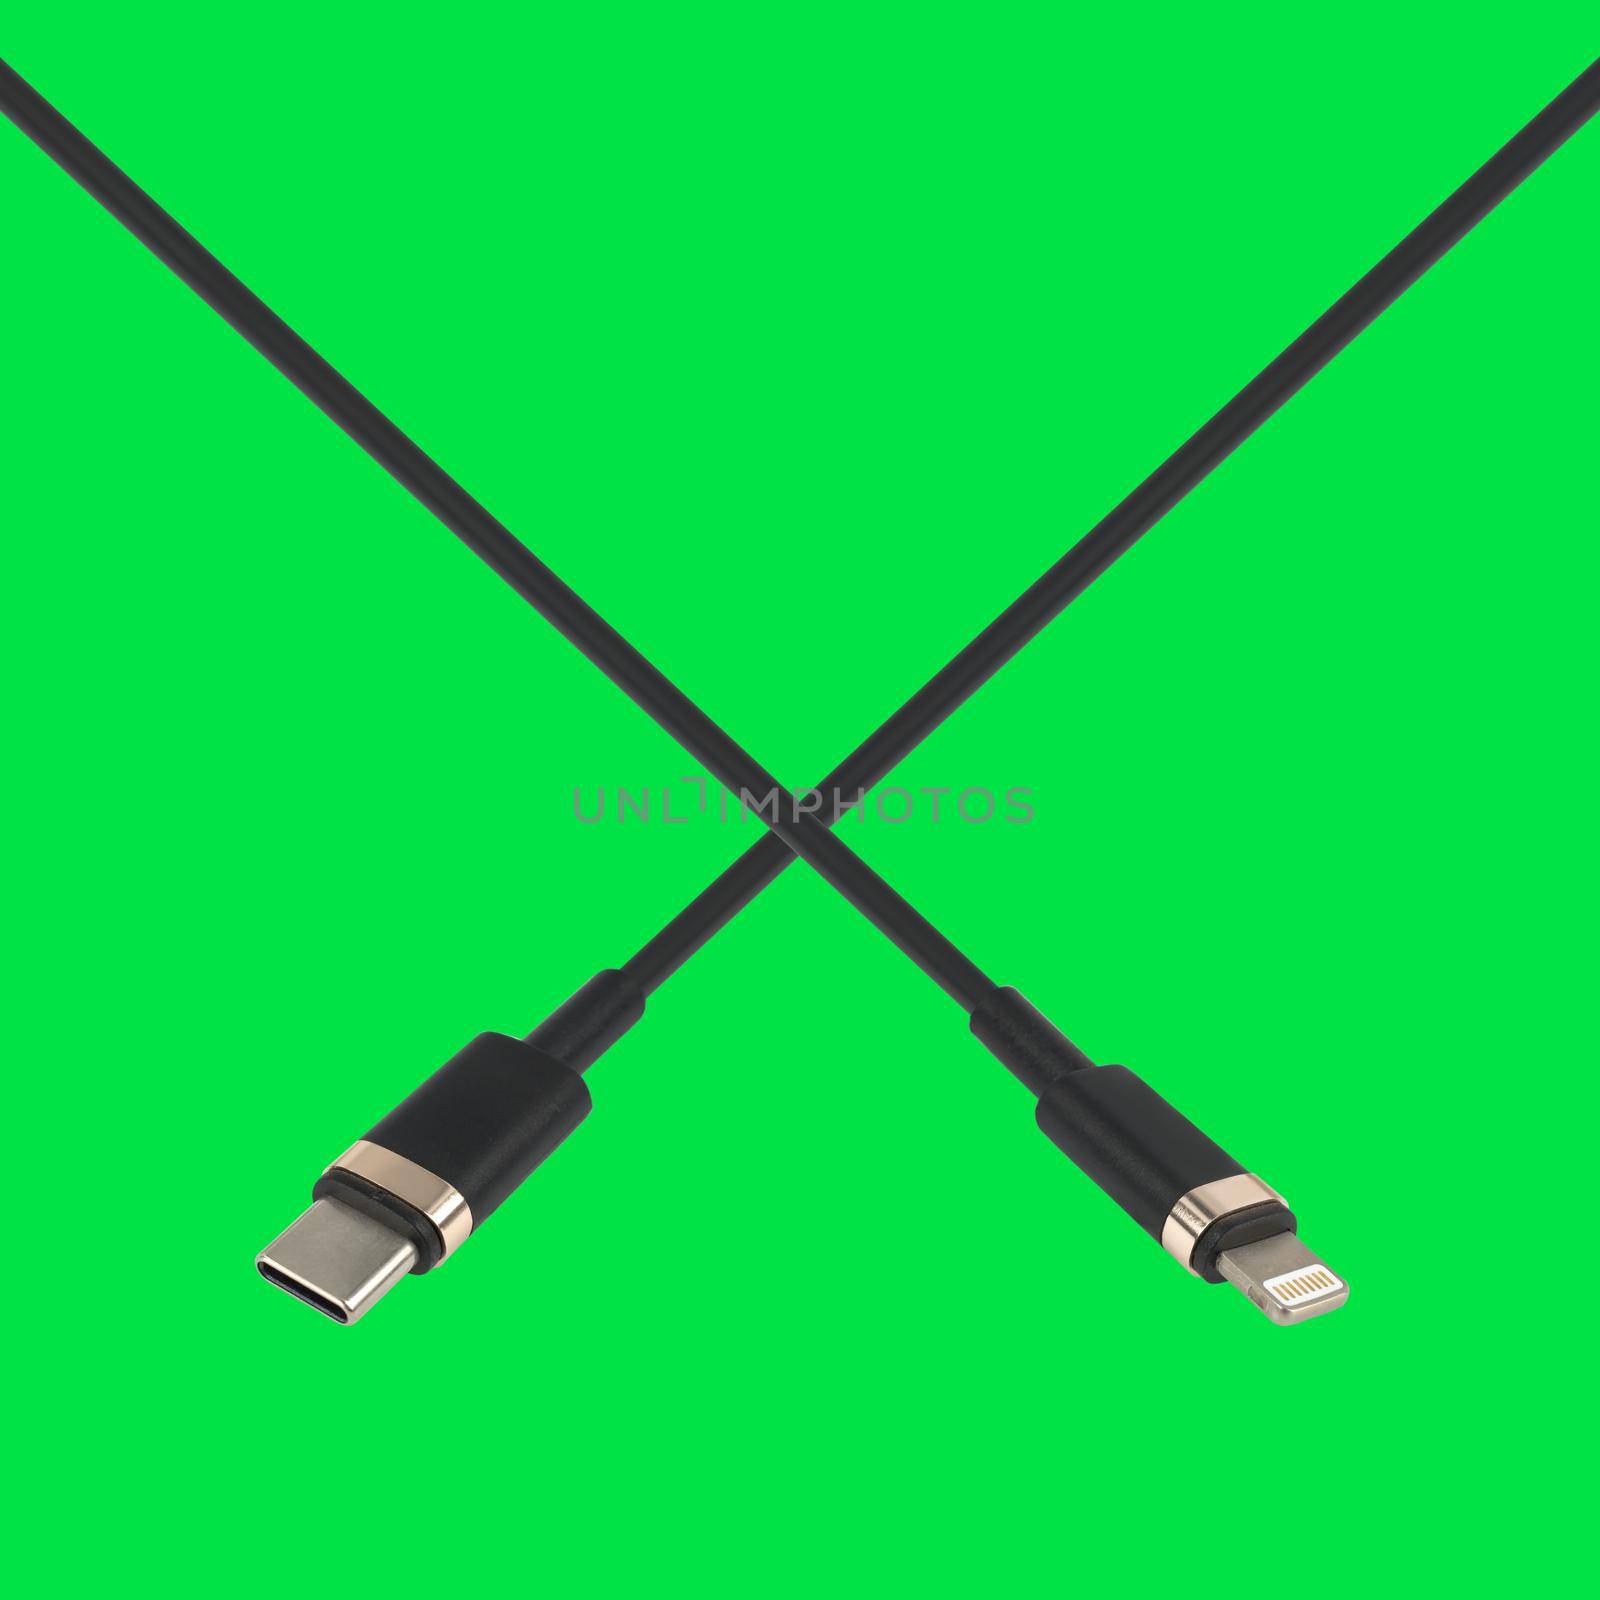 cable with Type-C connector and Lightning, on a green background by A_A